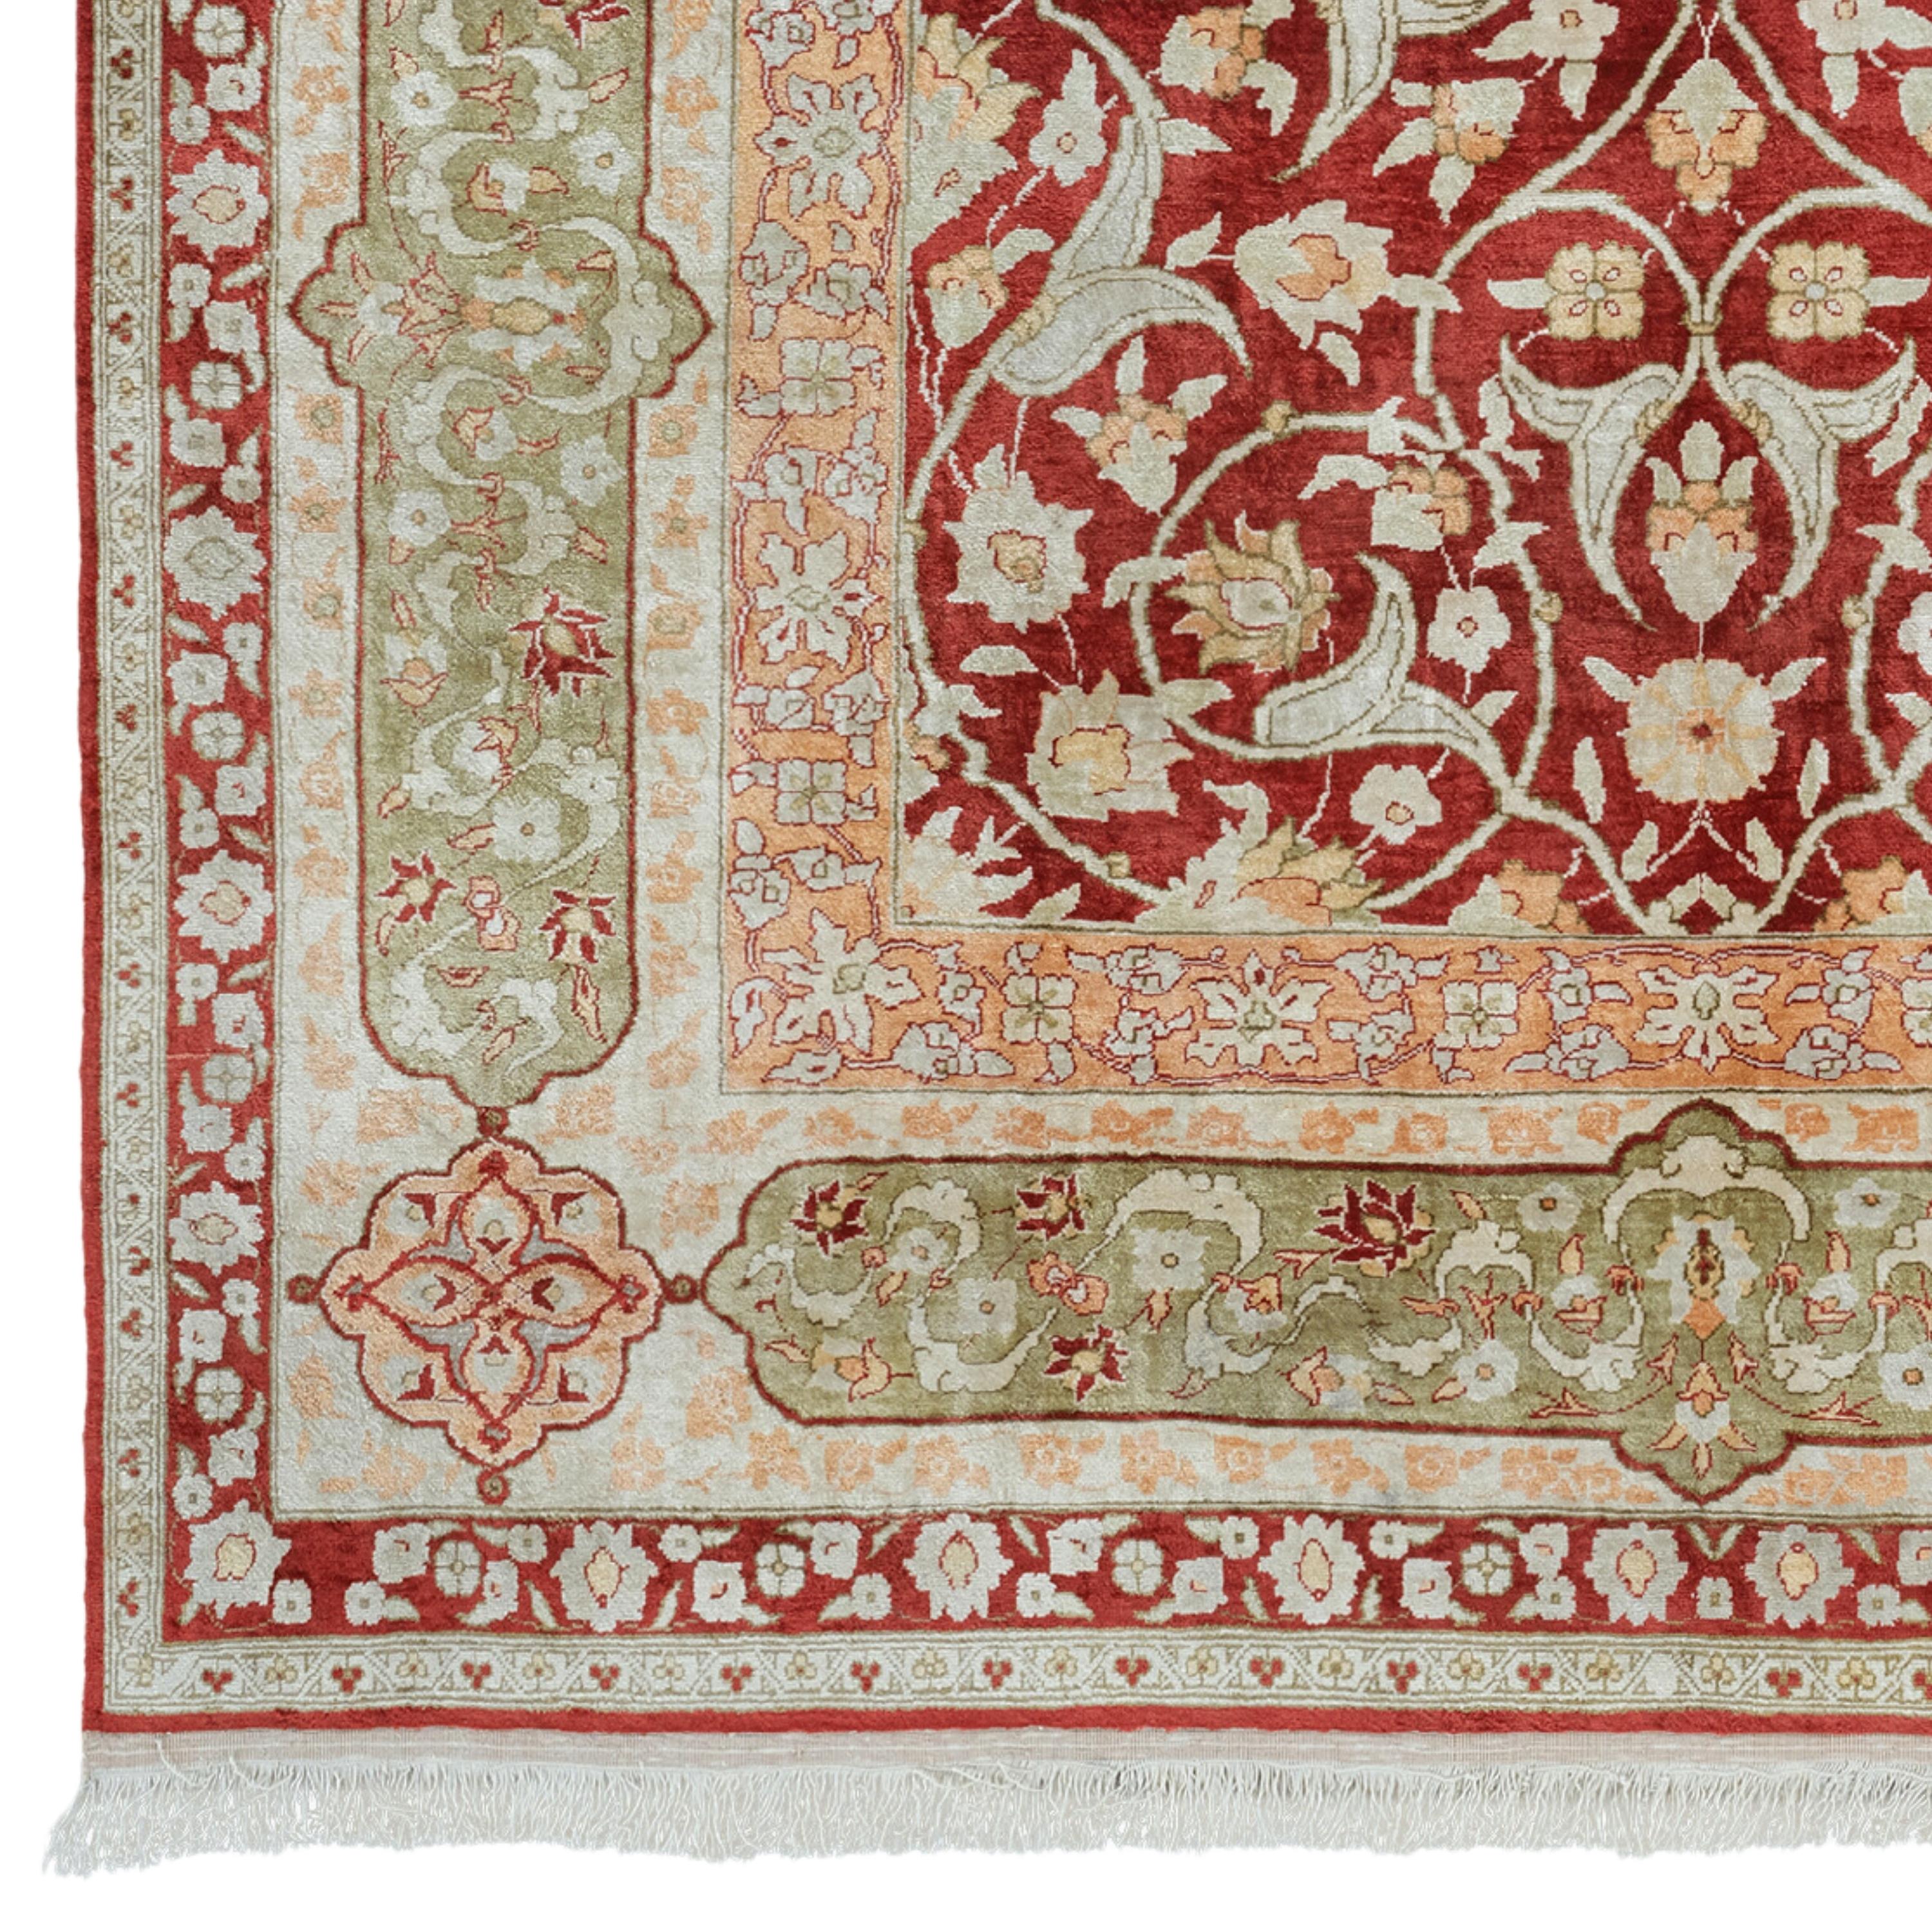 20th Century Silk Hereke Rug - Vintage Turkish Silk Rug, Hereke Silk Rug

This 20th century antique silk Hereke carpet is an eye-catching work of art with its rich design and patterns. Featuring a central medallion and decorative edge trim, this rug